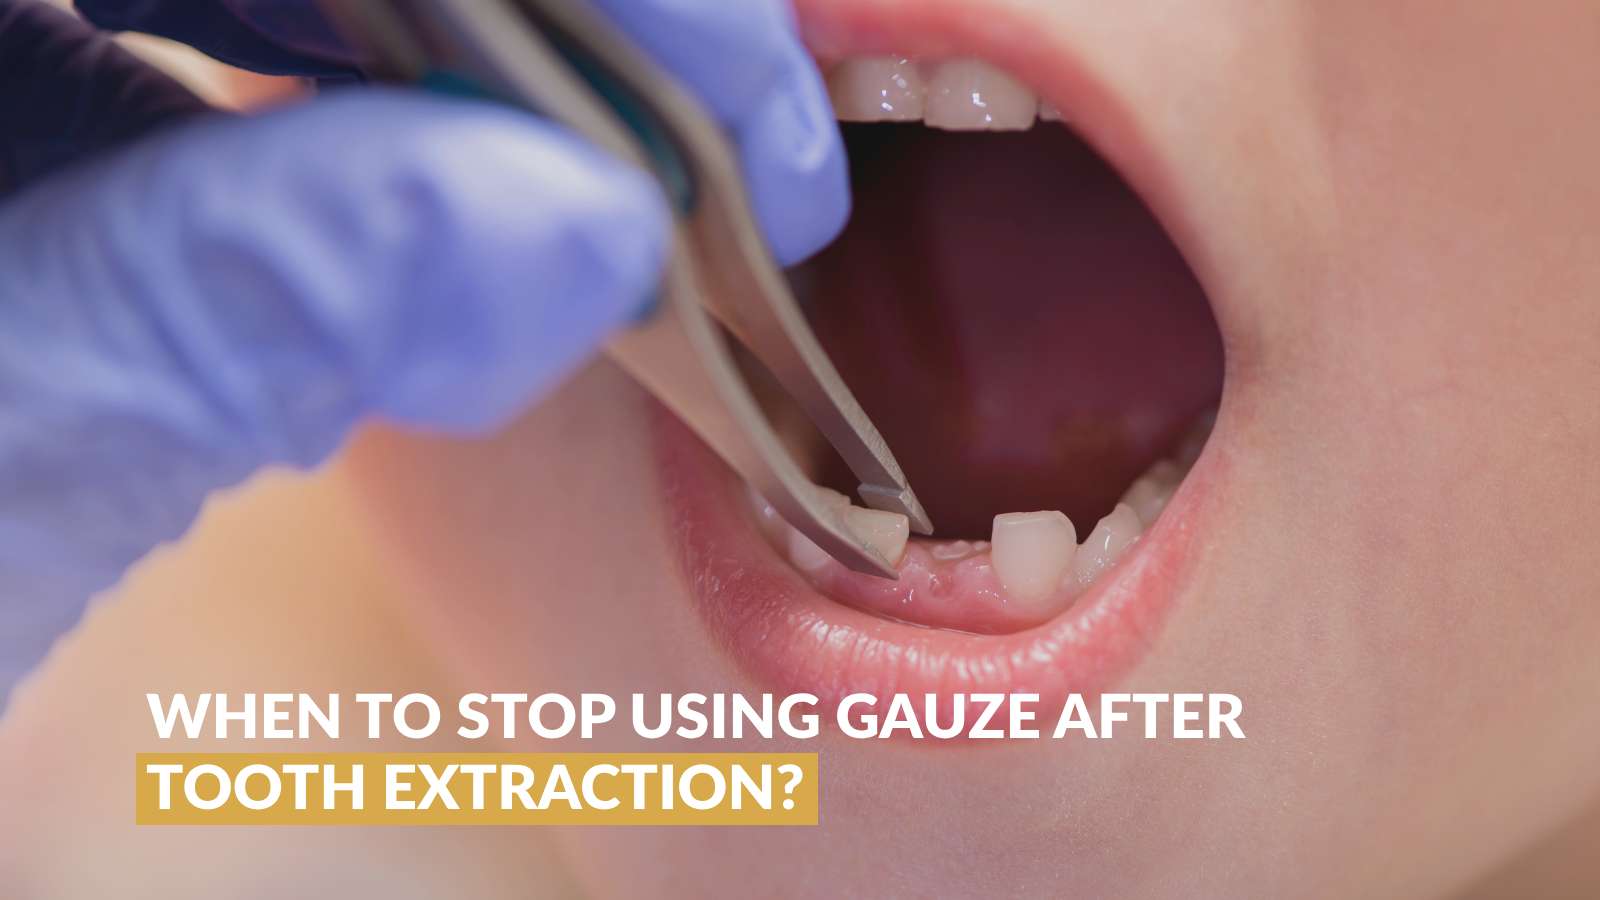 When to Stop Using Gauze After Tooth Extraction? - Sherman Oaks Smile Studio